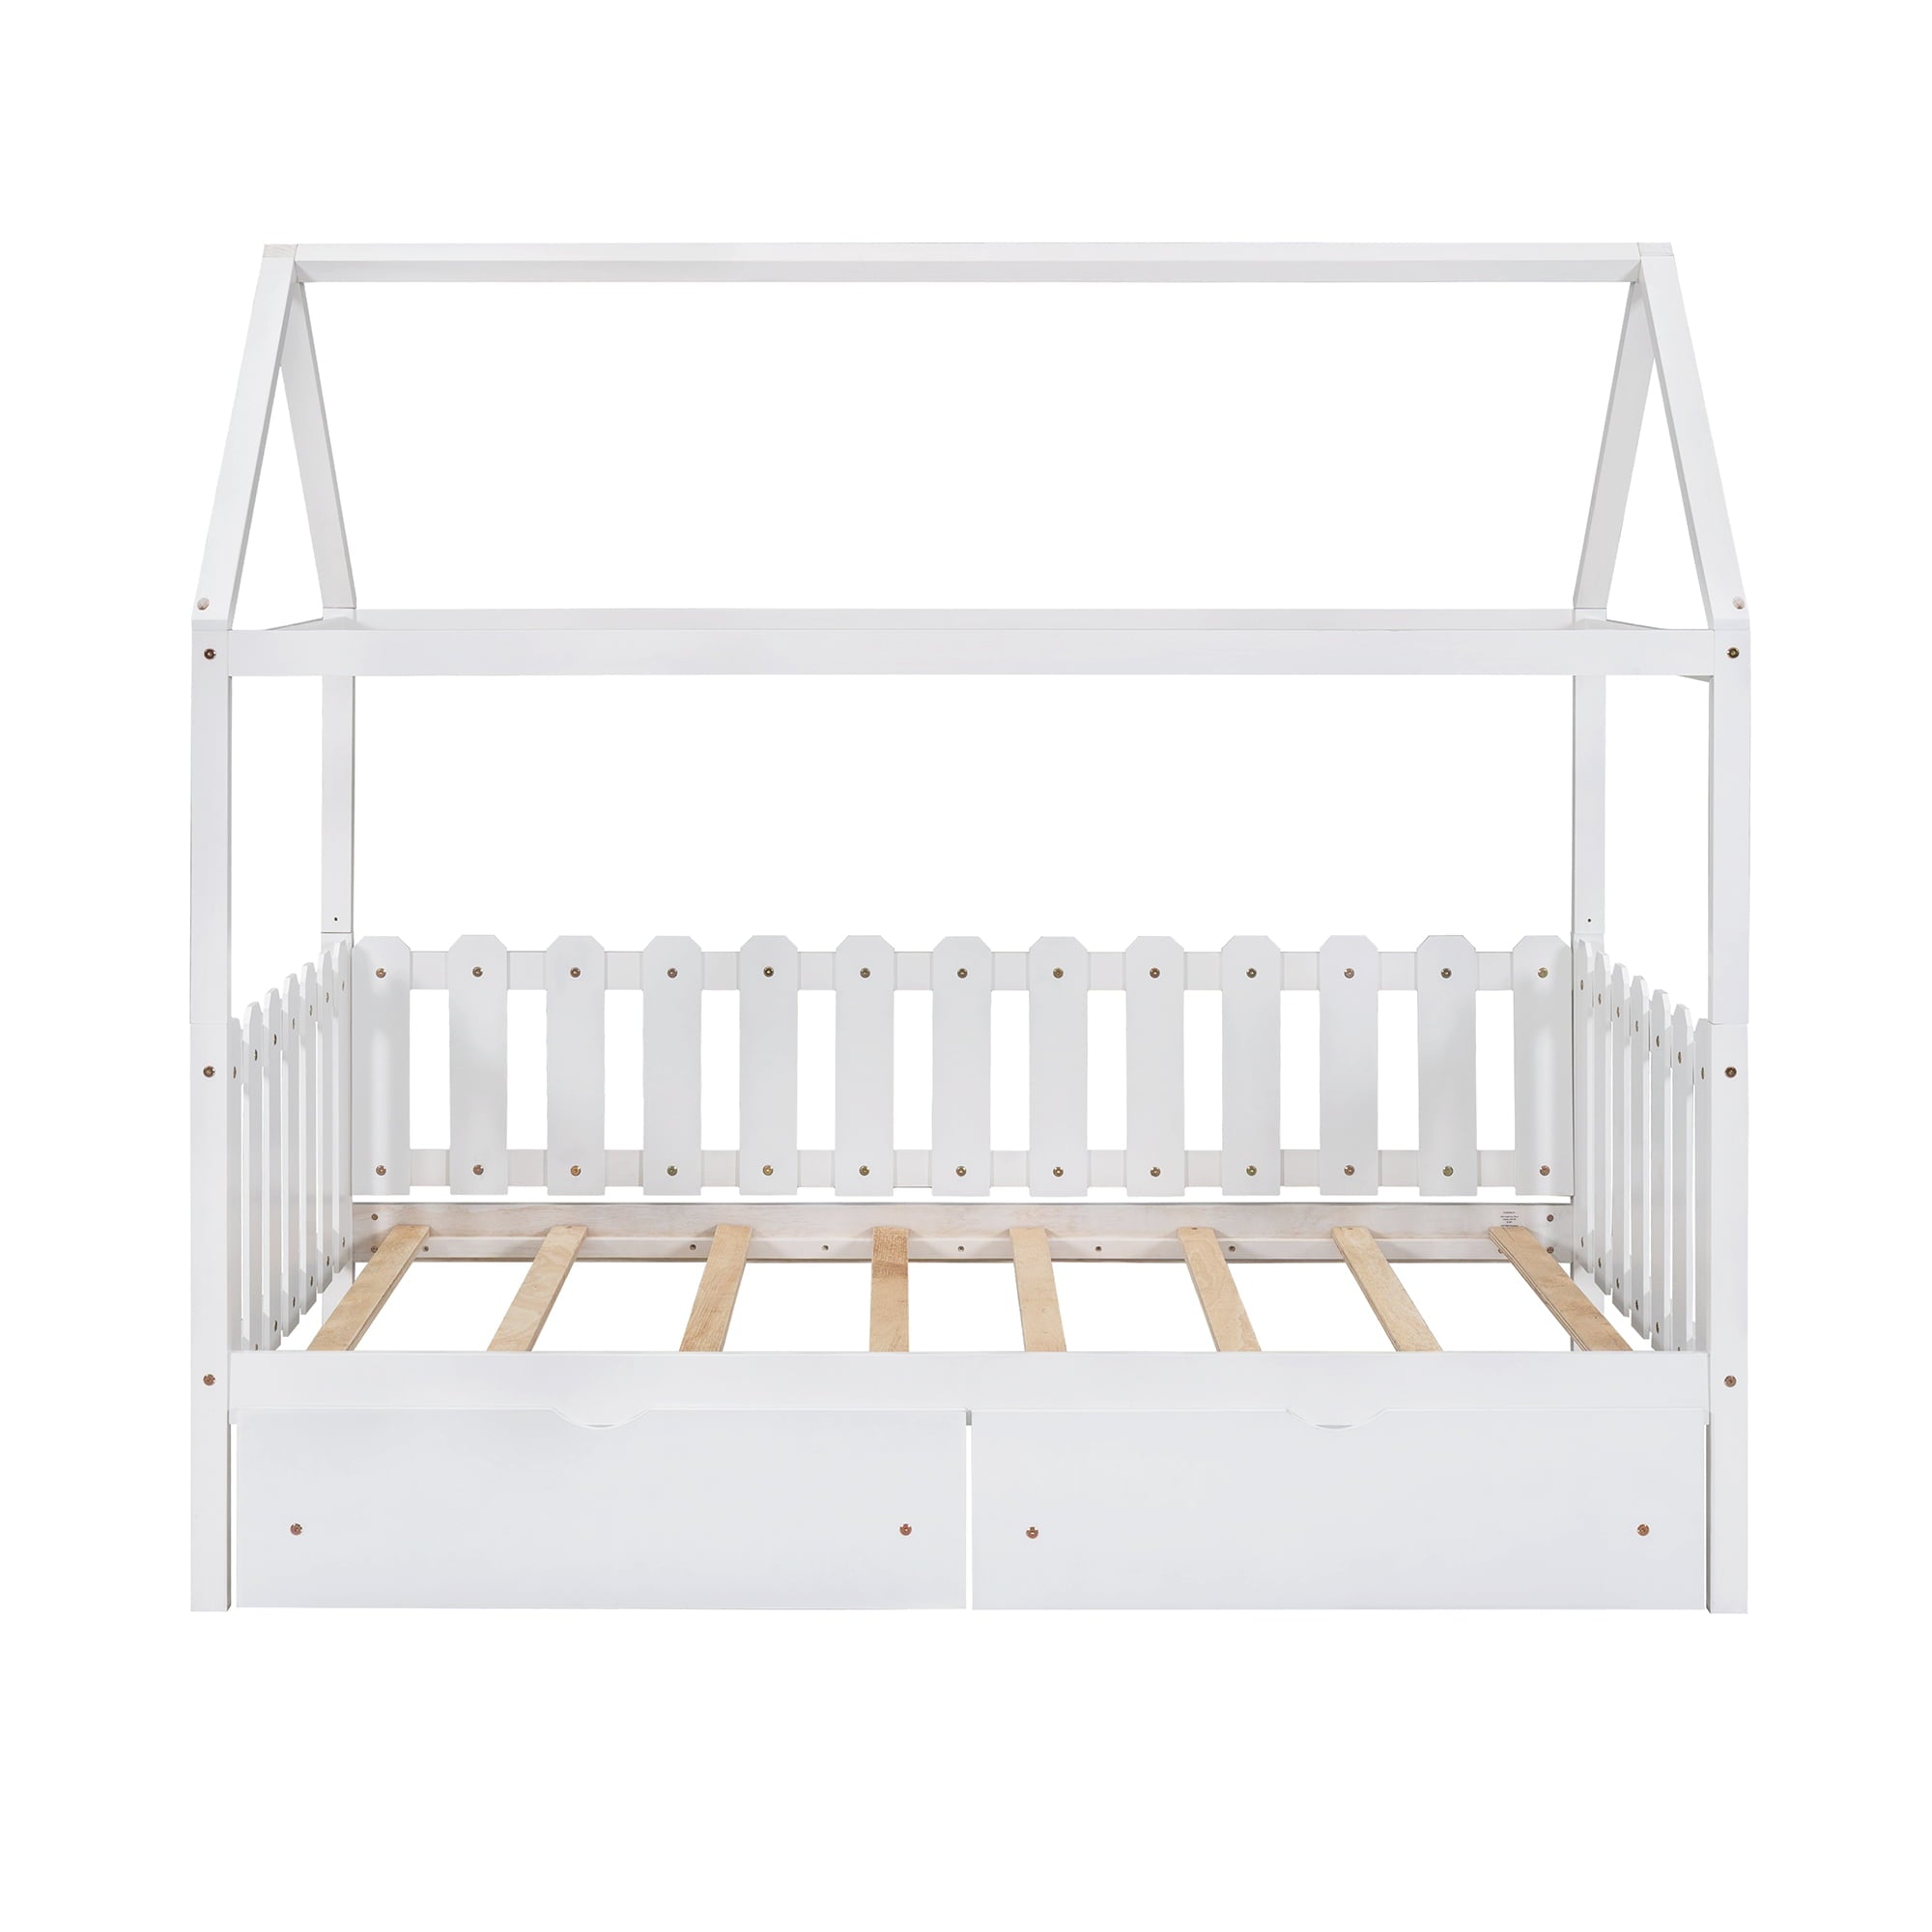 Euroco Twin Size Wood House-Shaped Bed with Drawers for Kids, White